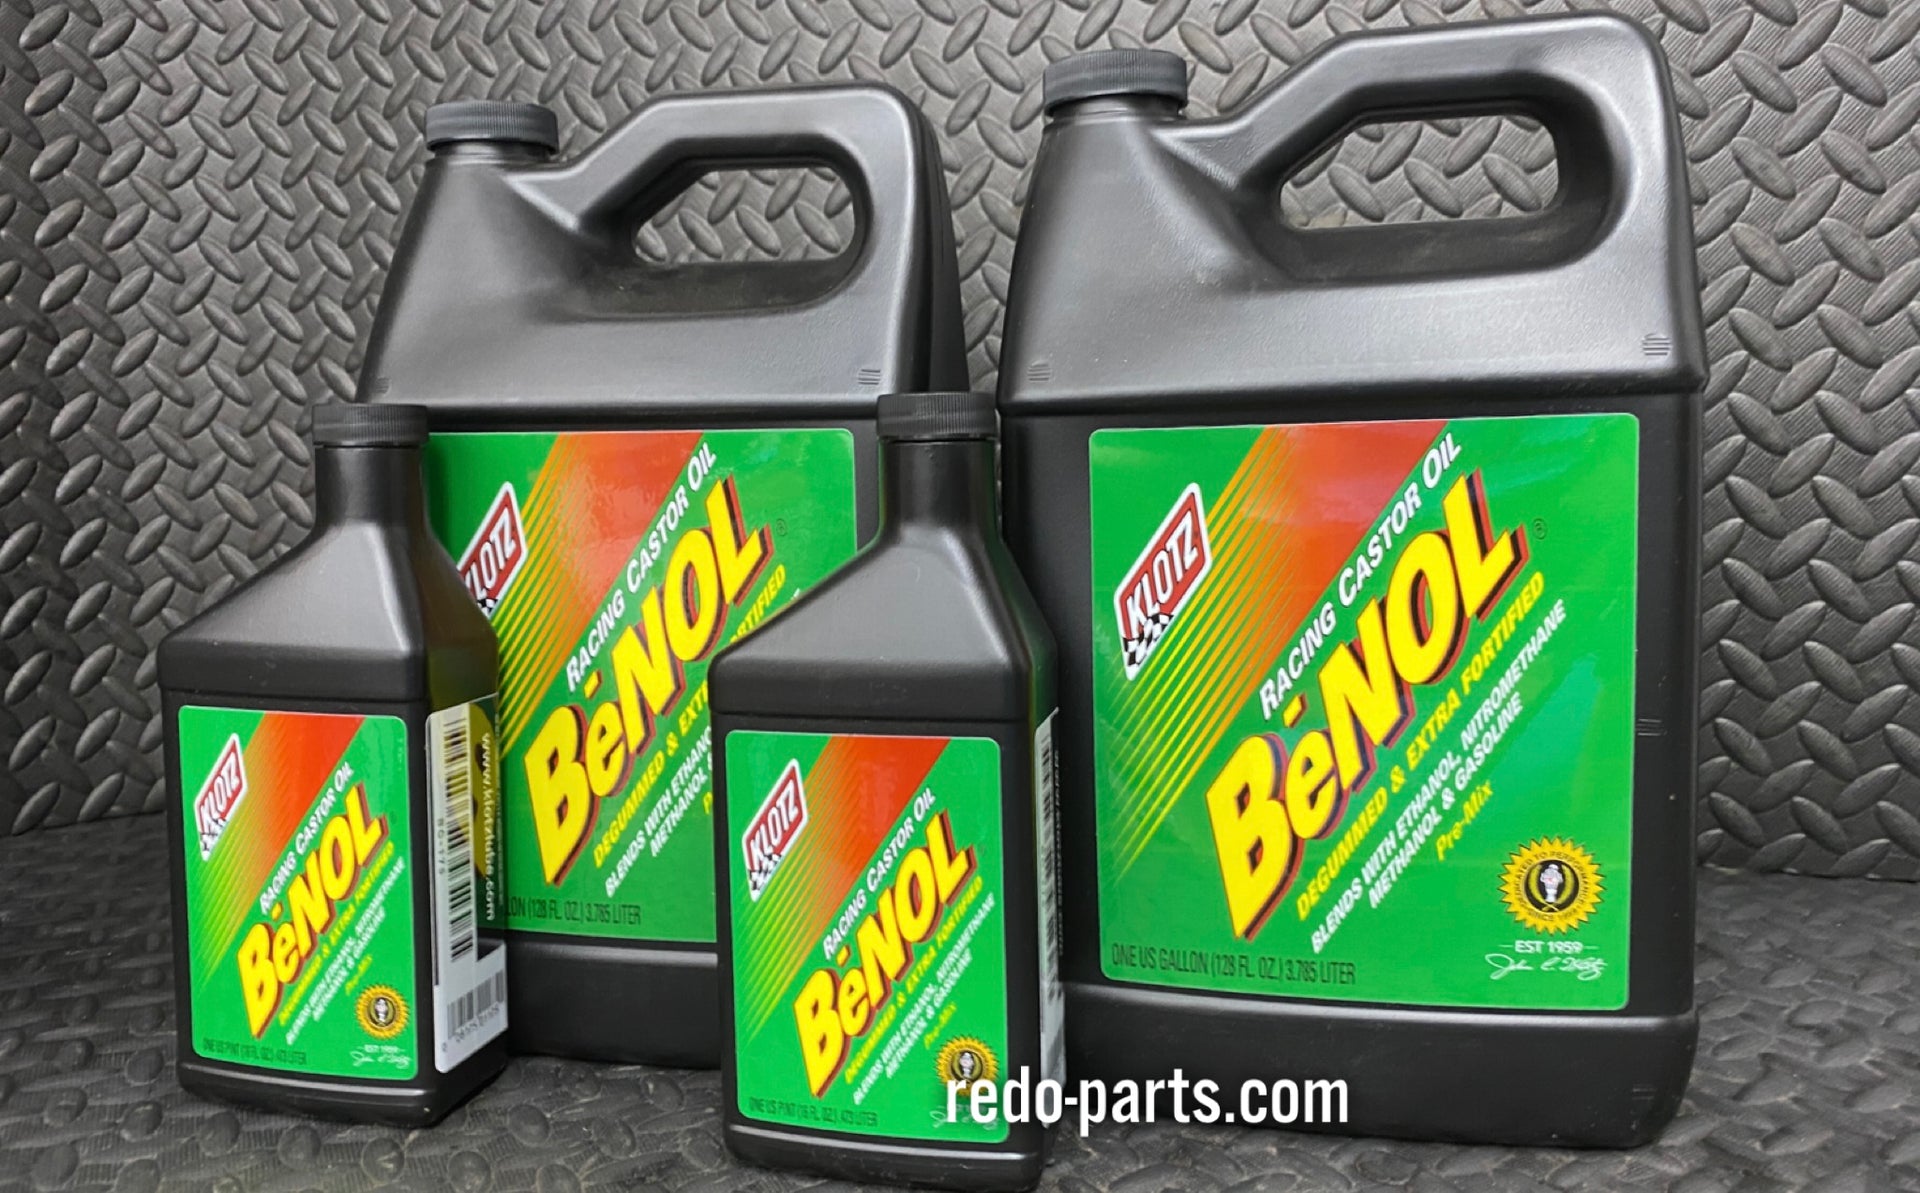 Re-Do Banshee Recommends KLOTZ BeNOL Racing 2-Stroke Oil – Re-Do Banshee  Parts and Accessories